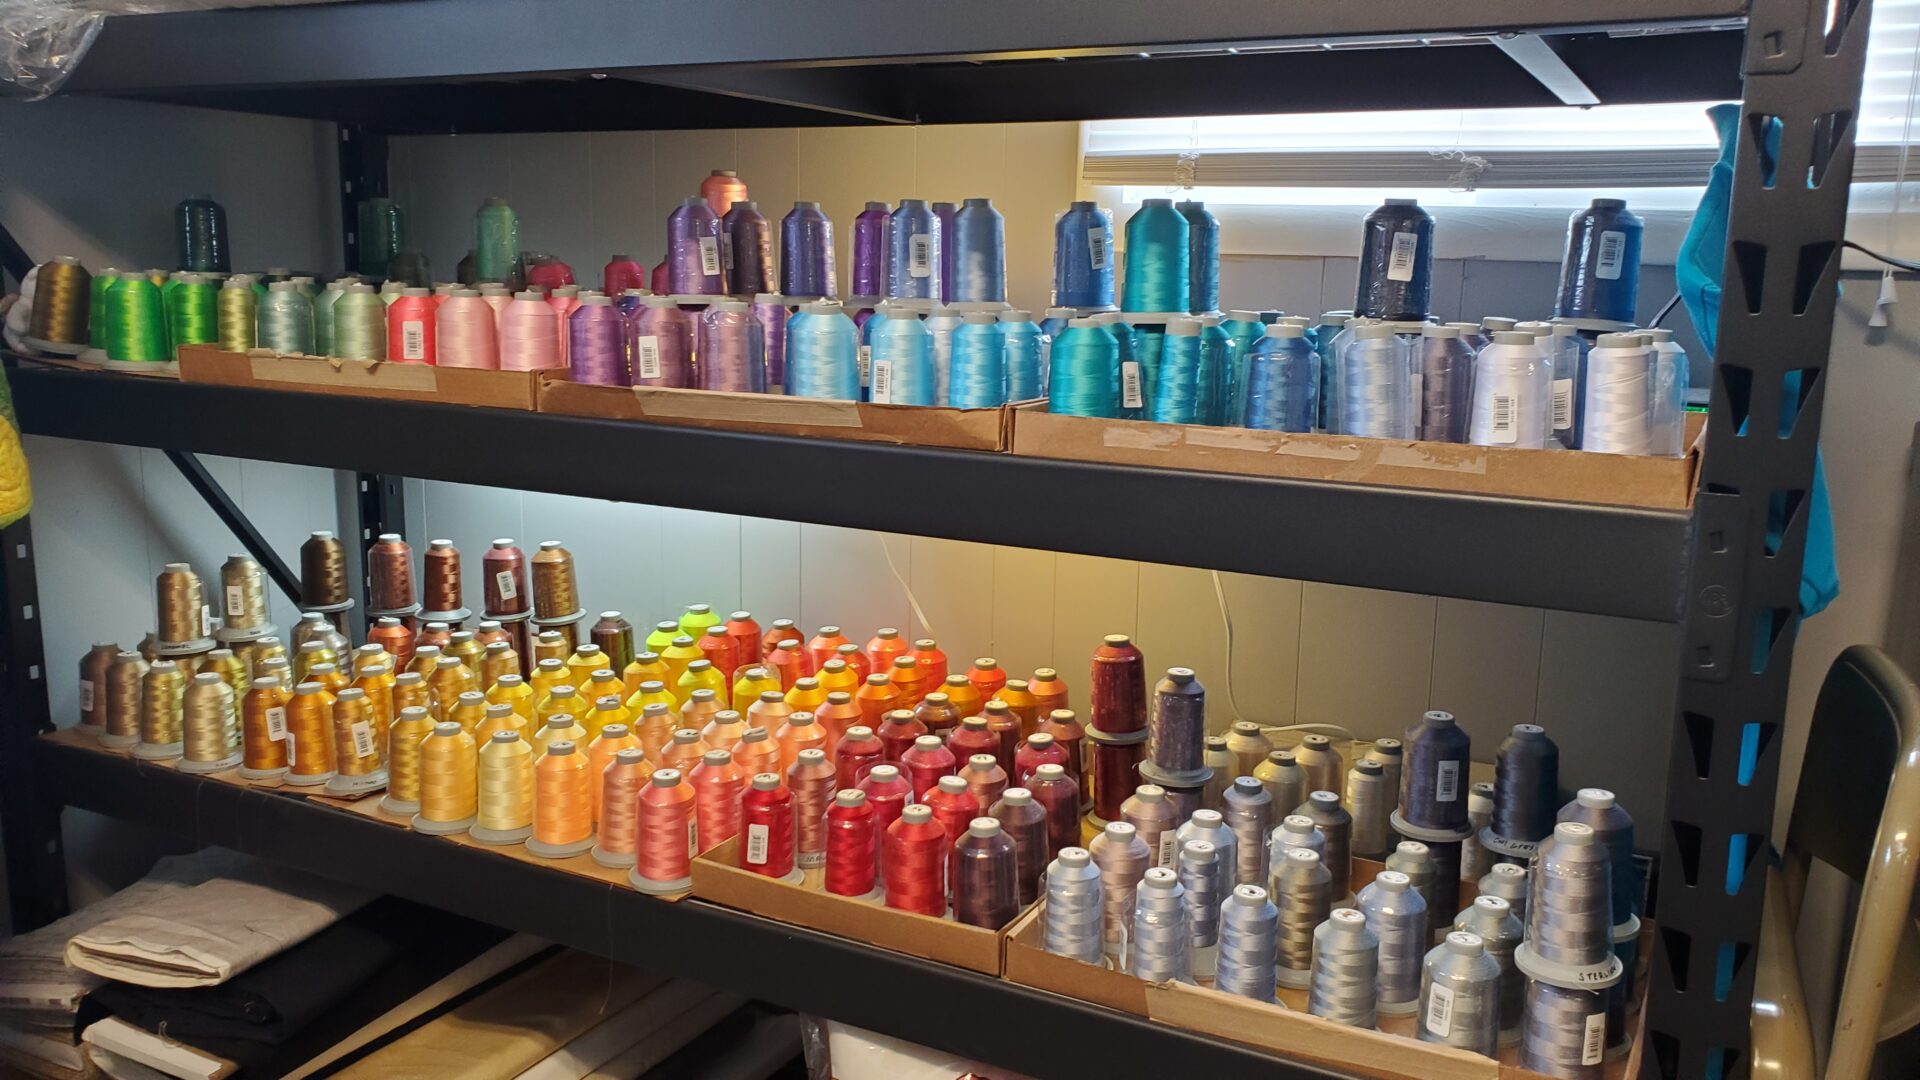 A shelf filled with many different colors of thread.